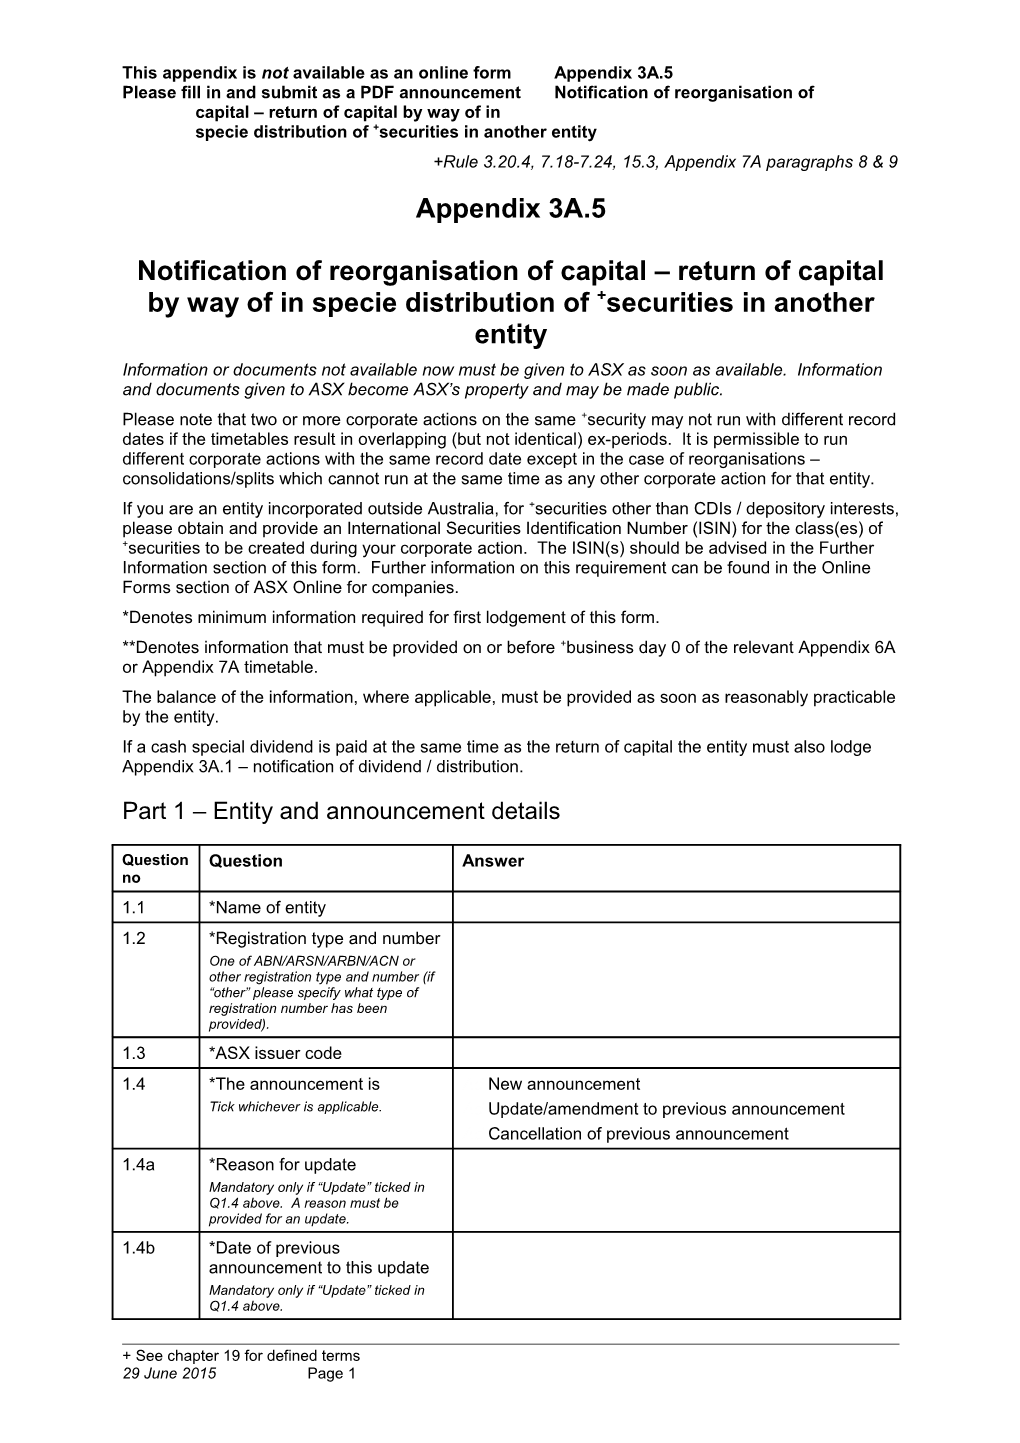 ASX Listing Rules Appendix 3A.5 - Notification of Reorganisation of Capital